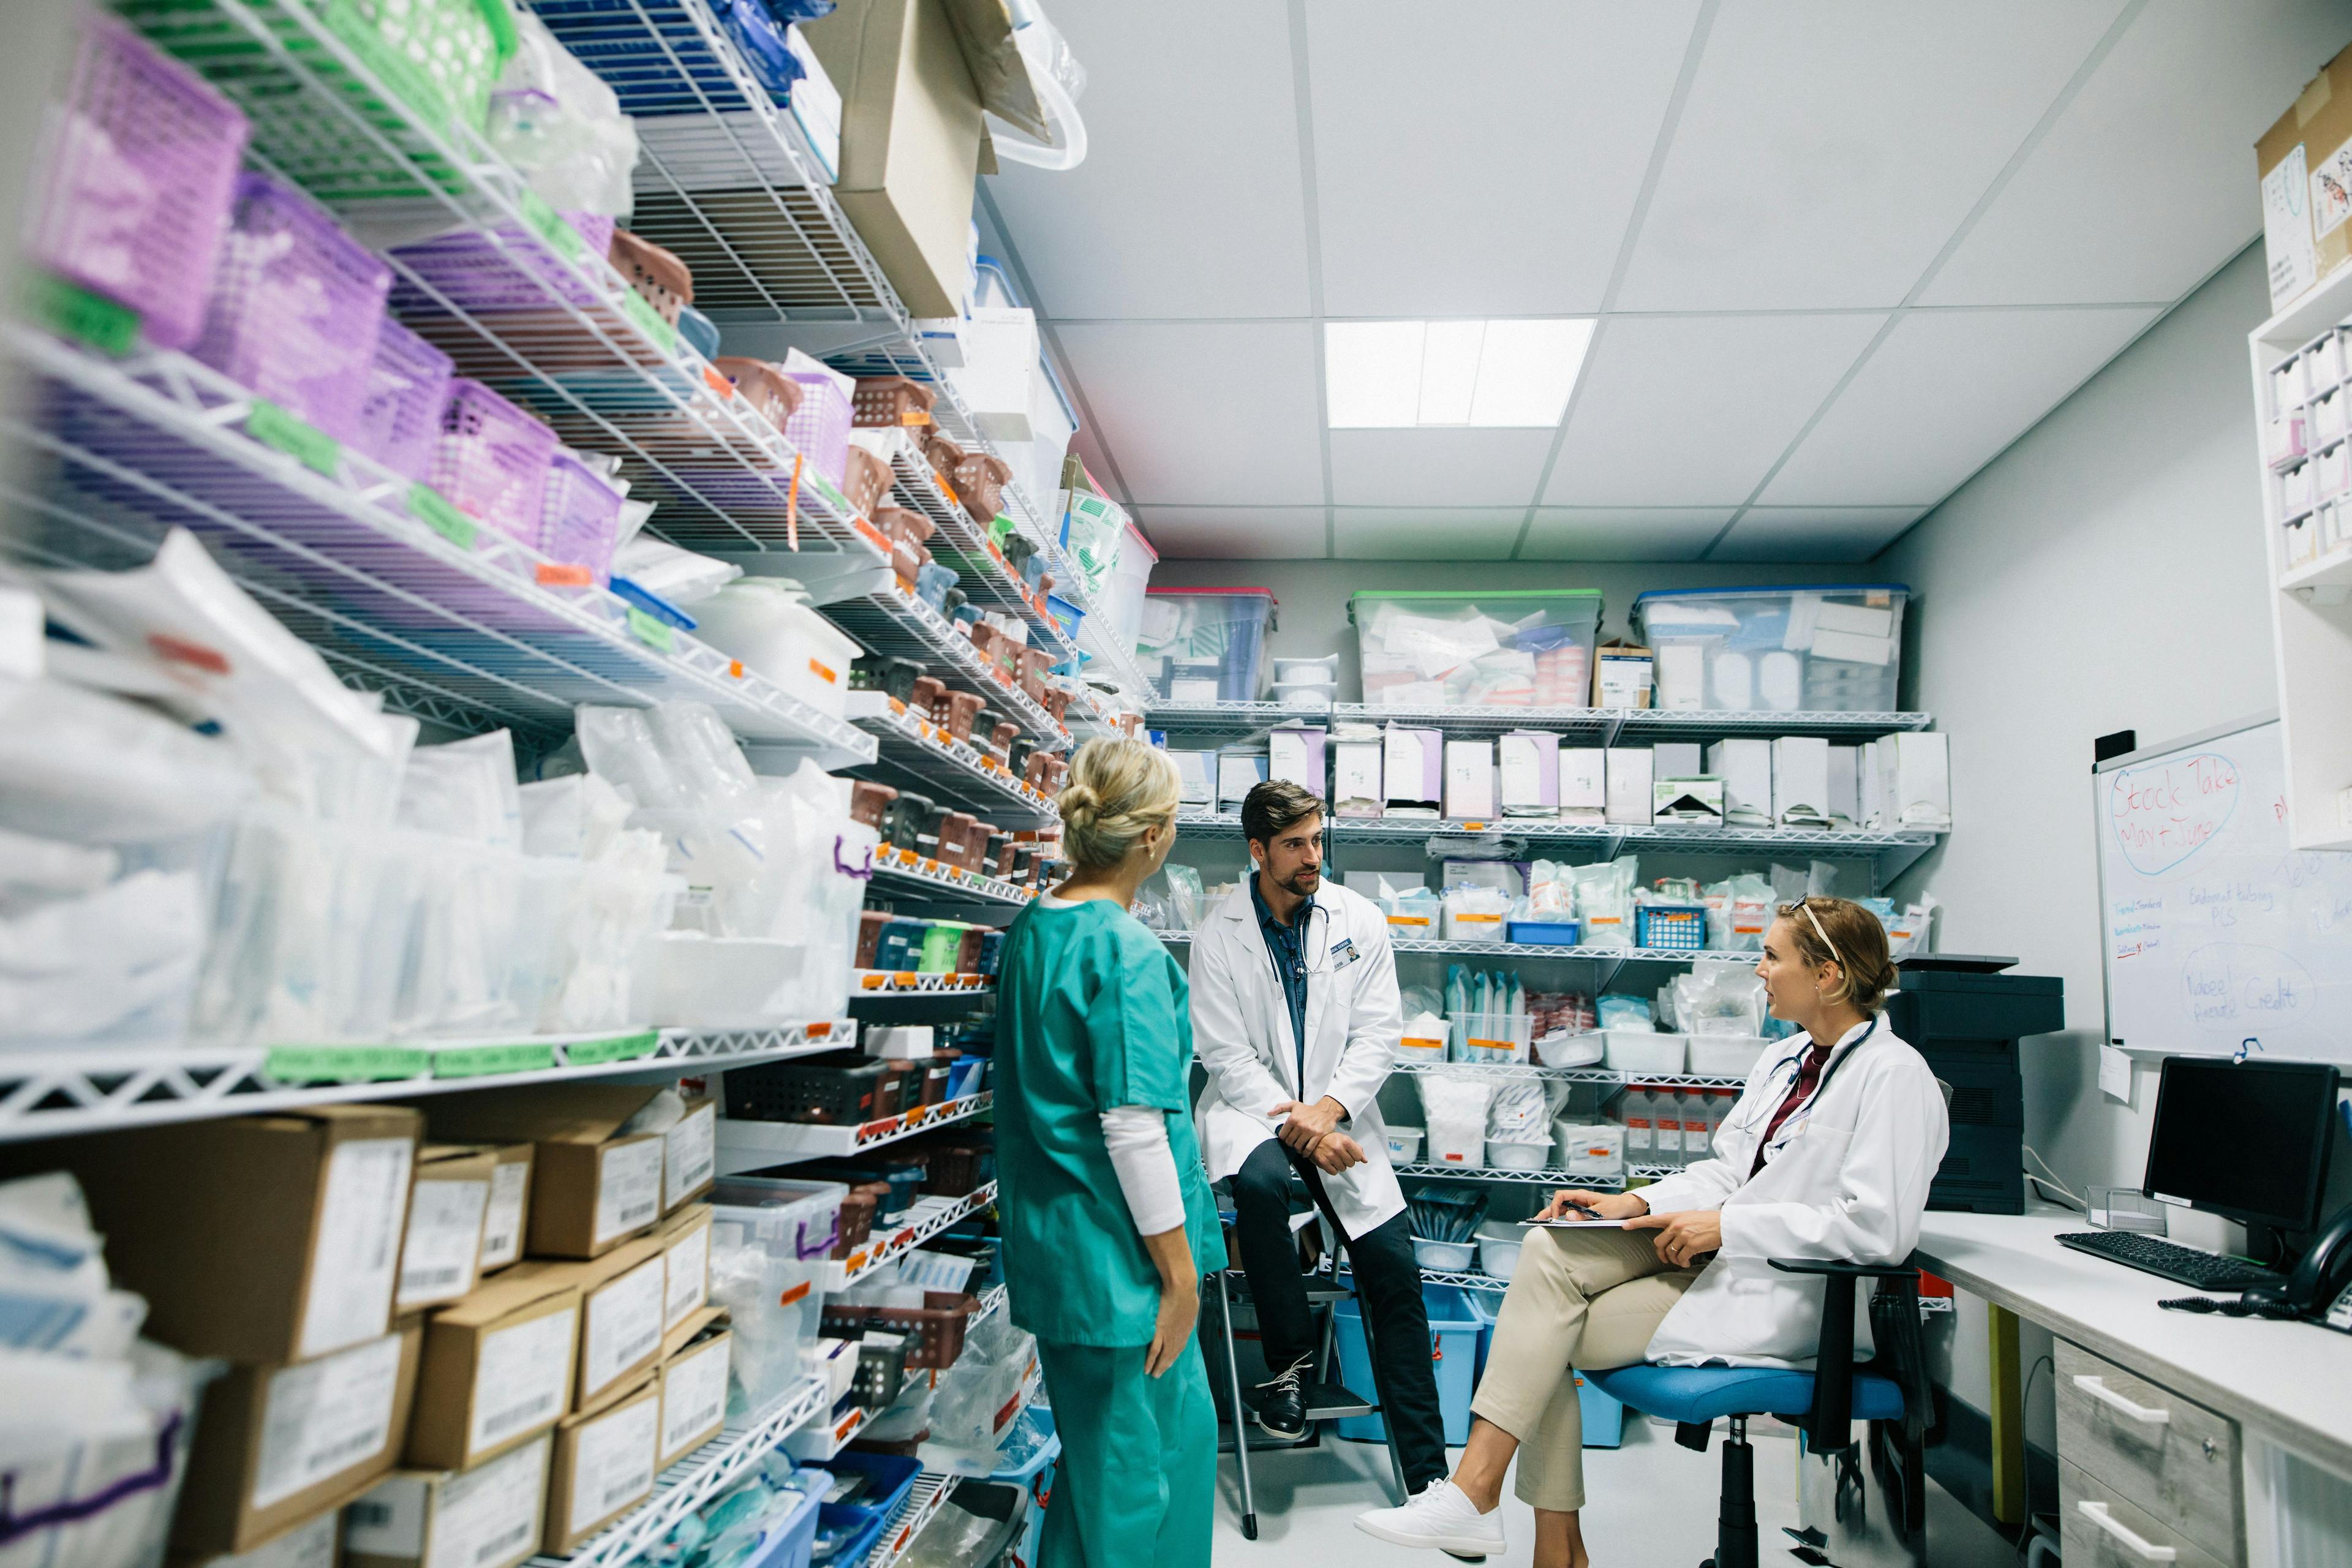 Pharmacists talking with a nurse | Image credit: Jacob Lund - stock.adobe.com